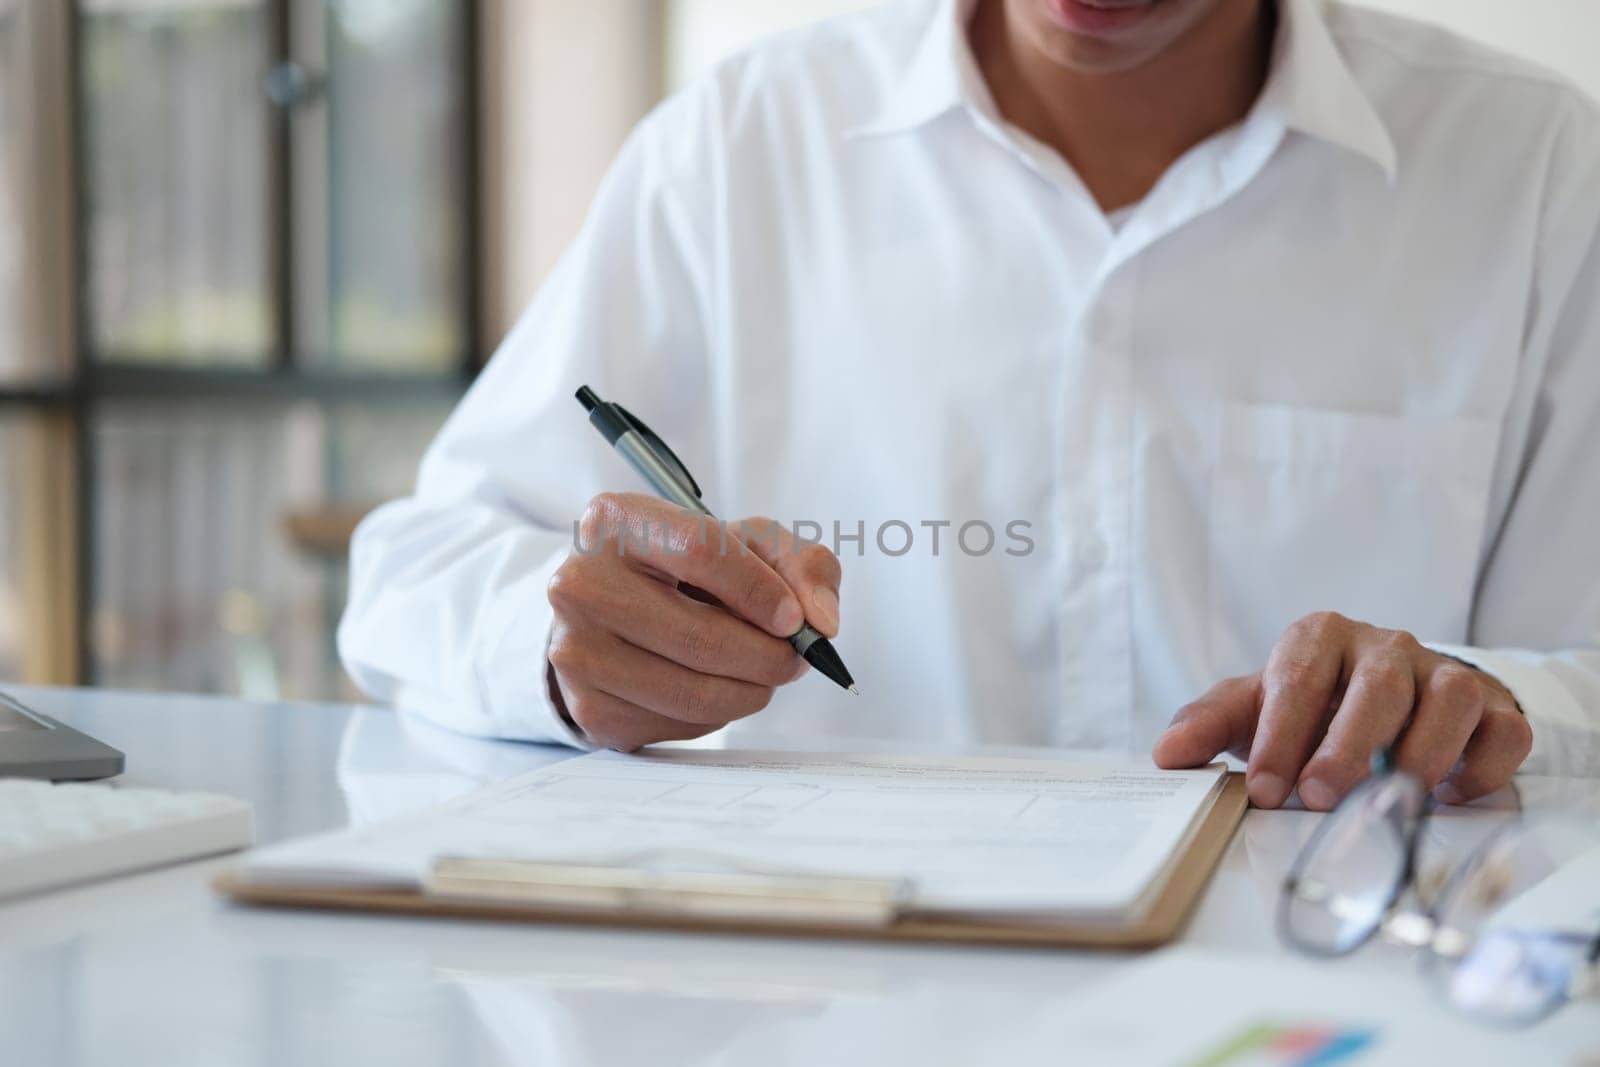 A man is writing on a piece of paper with a pen by ijeab